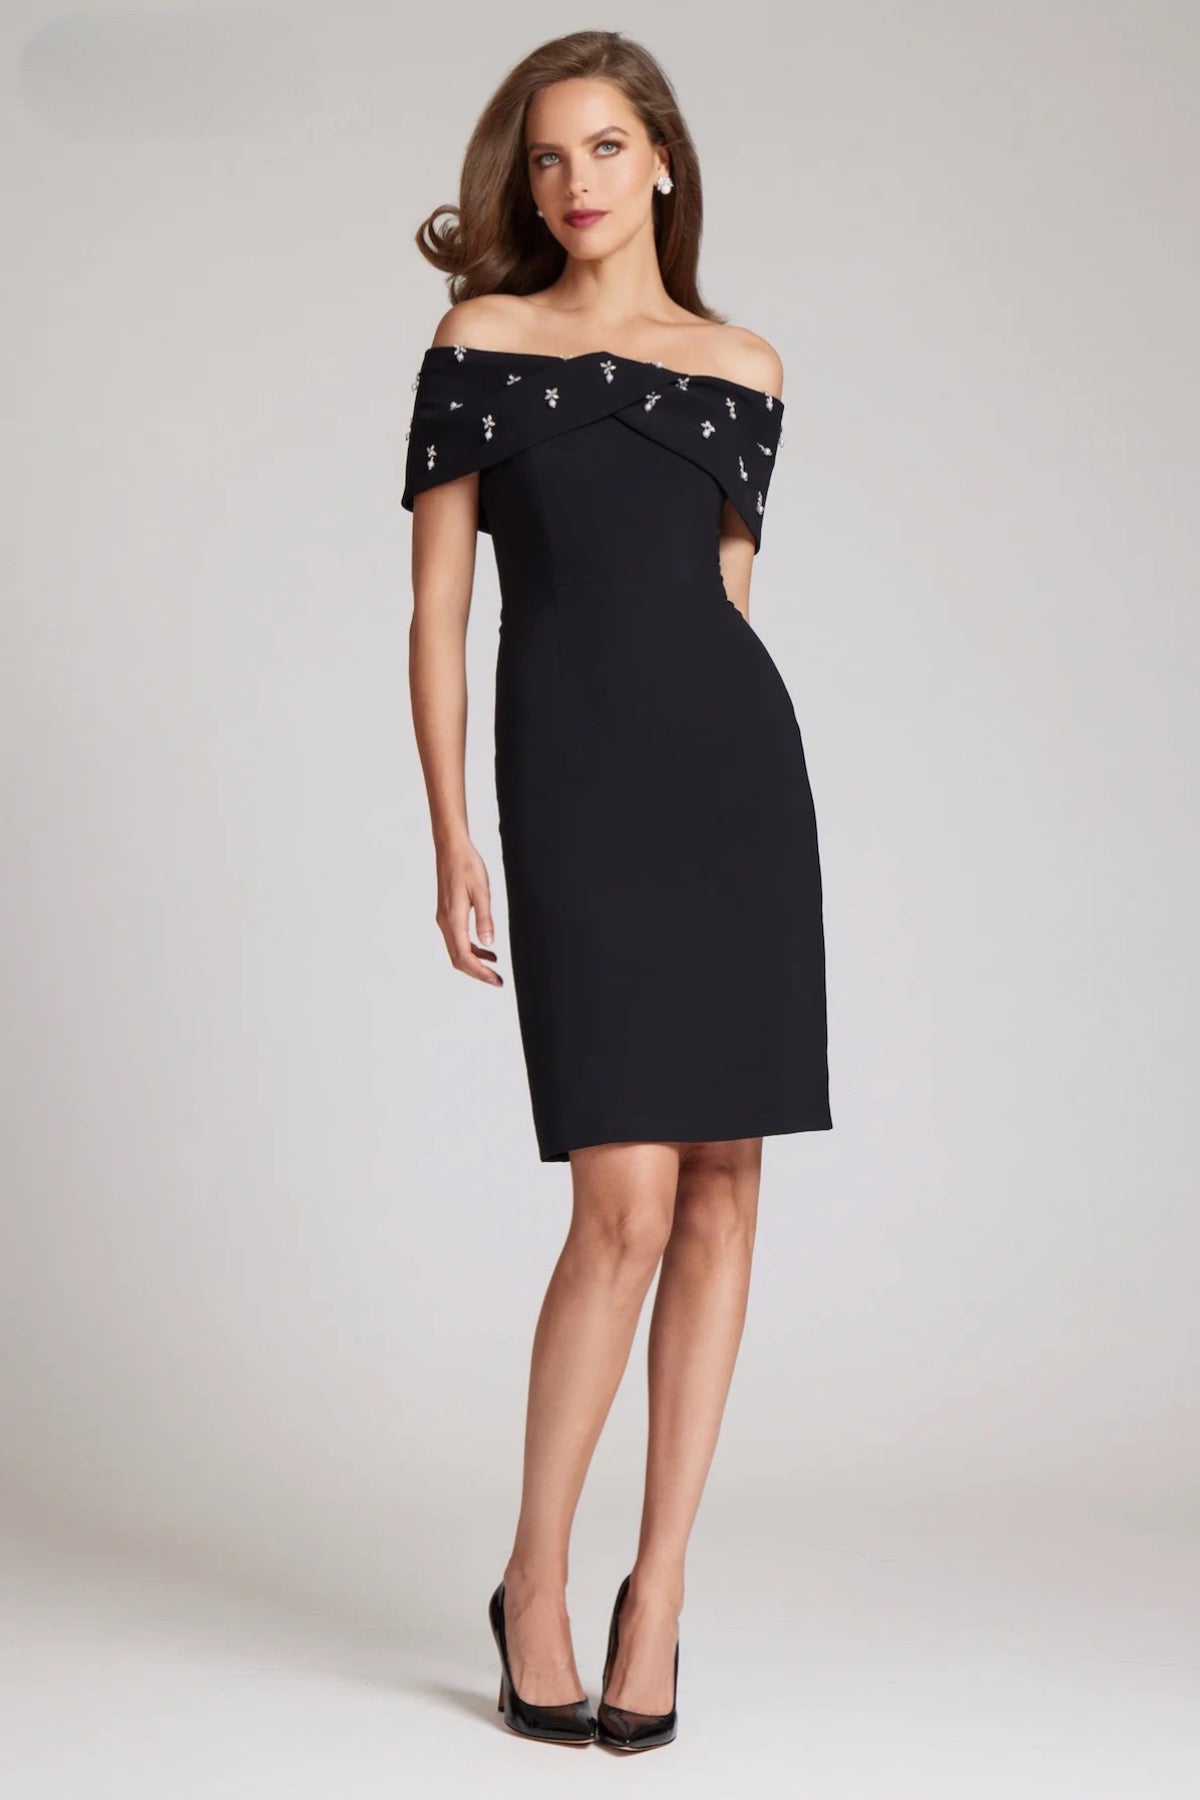 Elevate your style with Teri Jon style 237280 little black dress. Straight fit silhouette with off-the-shoulder sleeves and jeweled detailing. Perfect for cocktail parties and special events. Available at Madeline's Boutique, Toronto & Boca Raton.